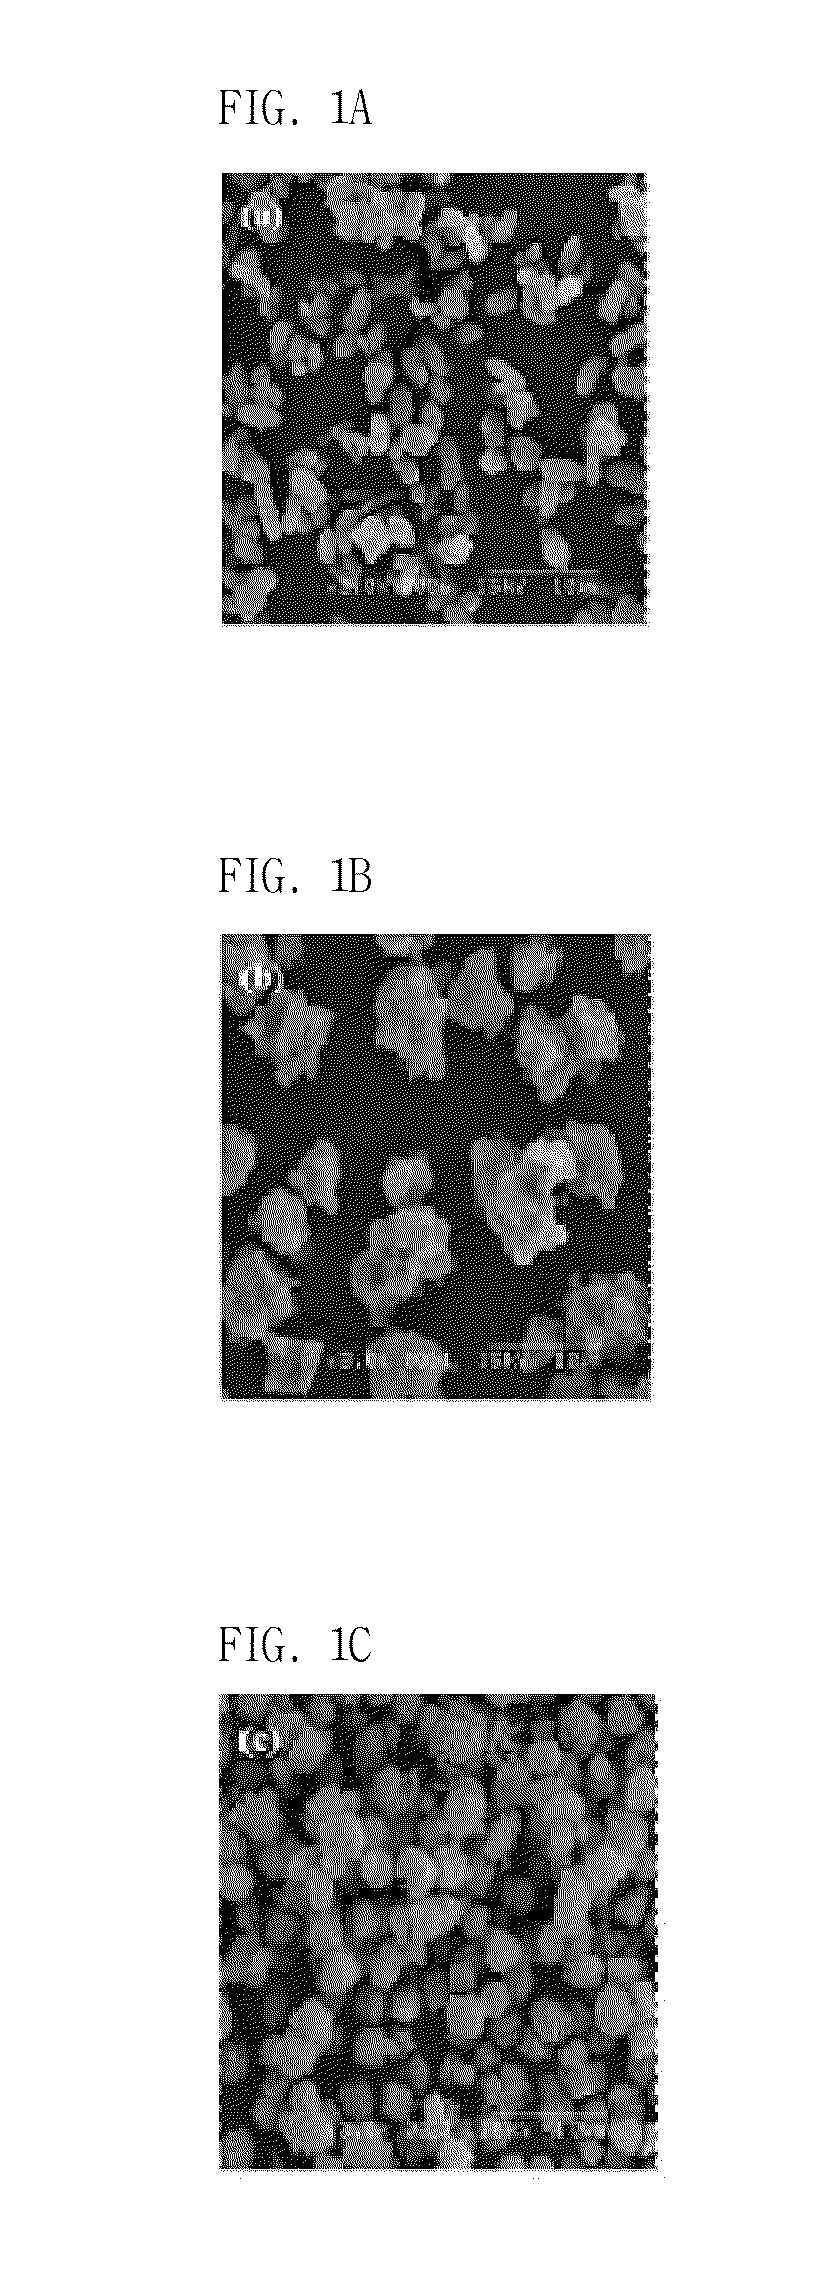 Calcium carbonate having a surface charge, the preparing process thereof and filler for producing a paper using the same